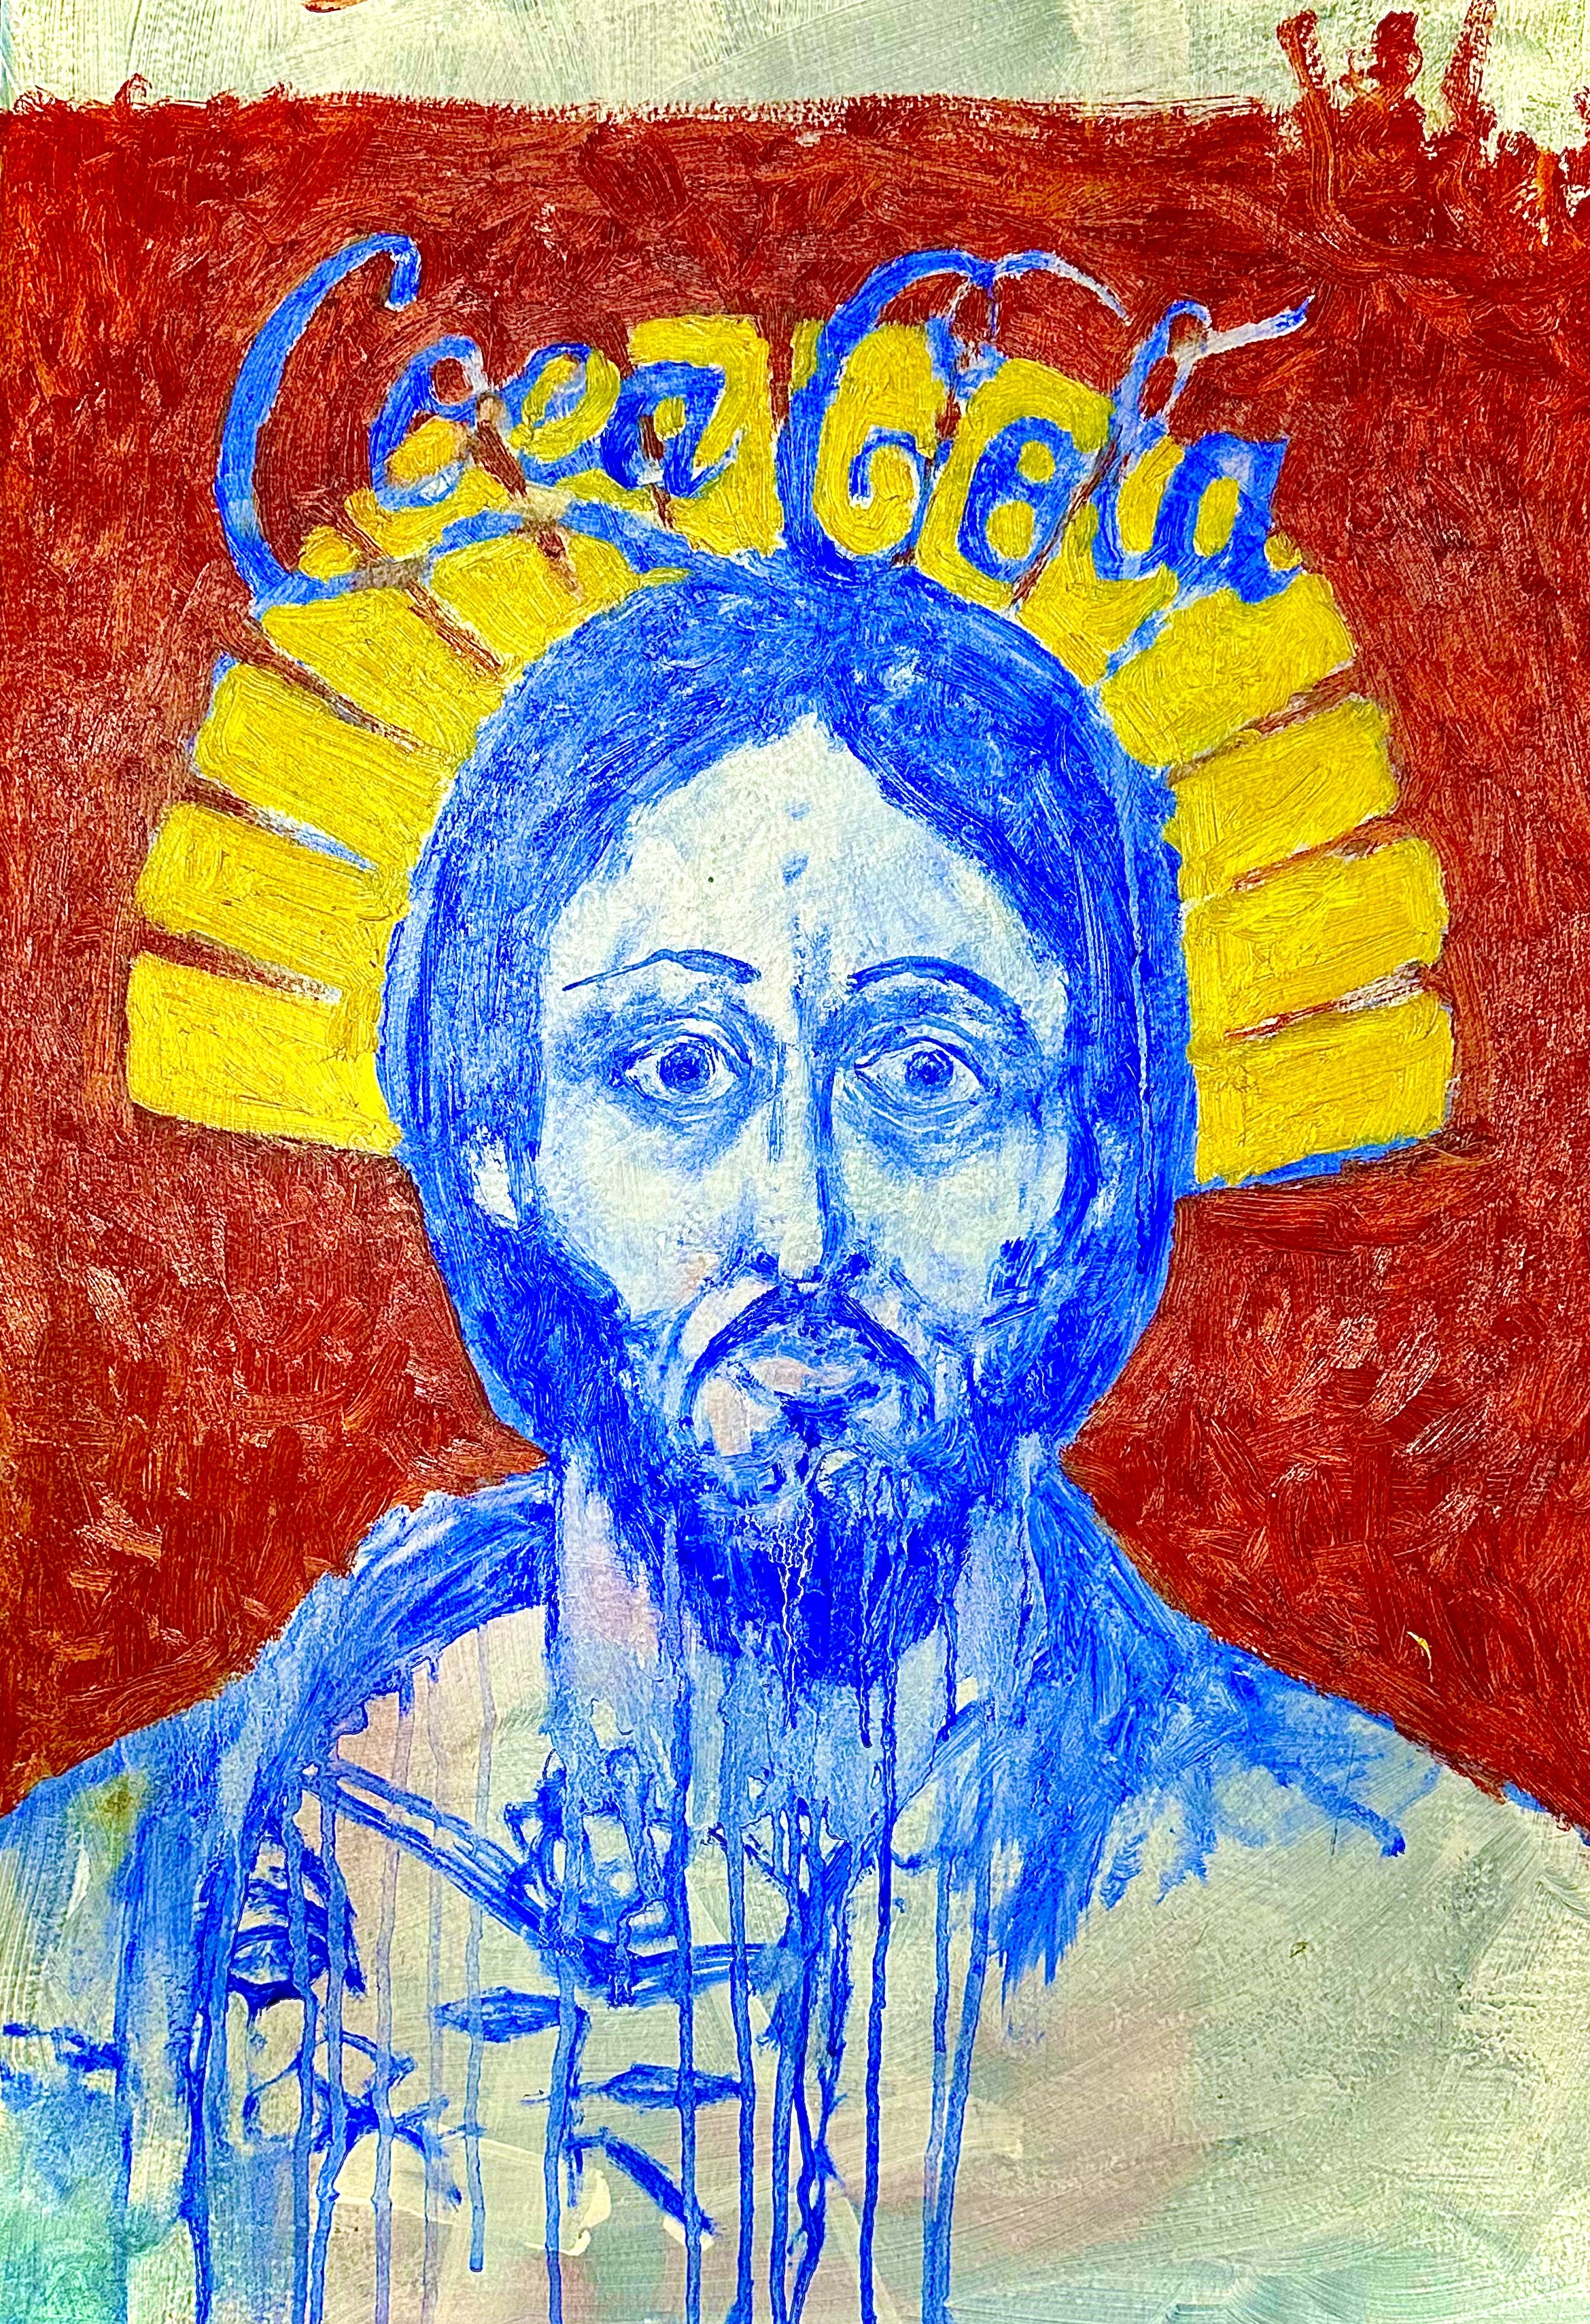 painted image in red and blue of bearded person